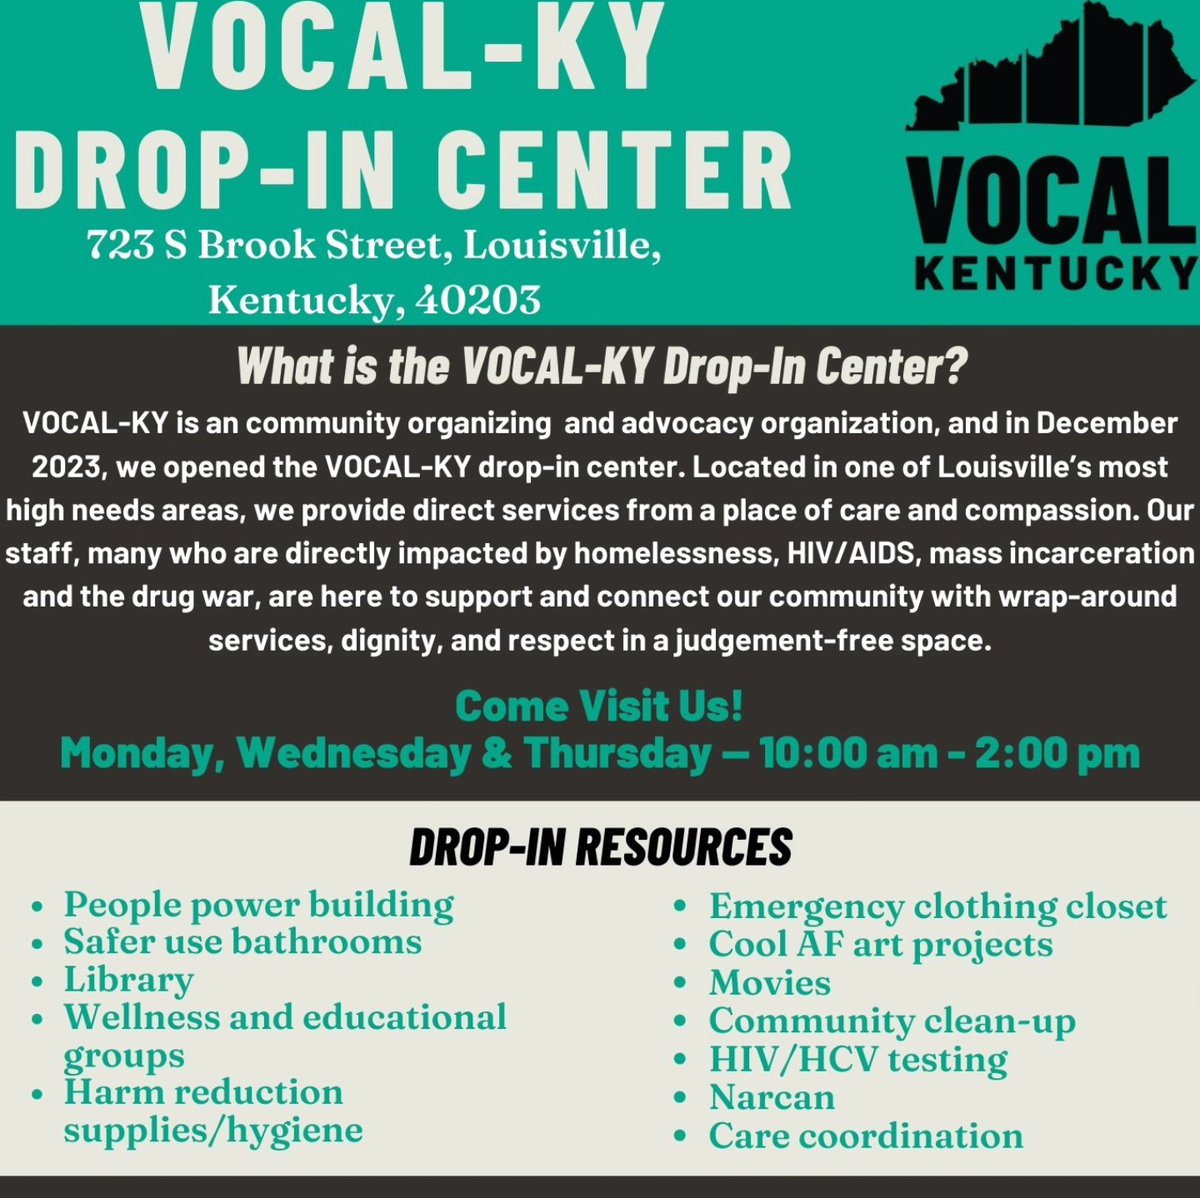 Meet Cocoa and Benz from #LifeWireless! 
They are here today to 1pm and will be here every Wednesday from 10:30am to 1pm during our VOCAL-KY Drop In Center days and times. 
Please come get a free phone if you are eligible and send a friend or family member if they need one.